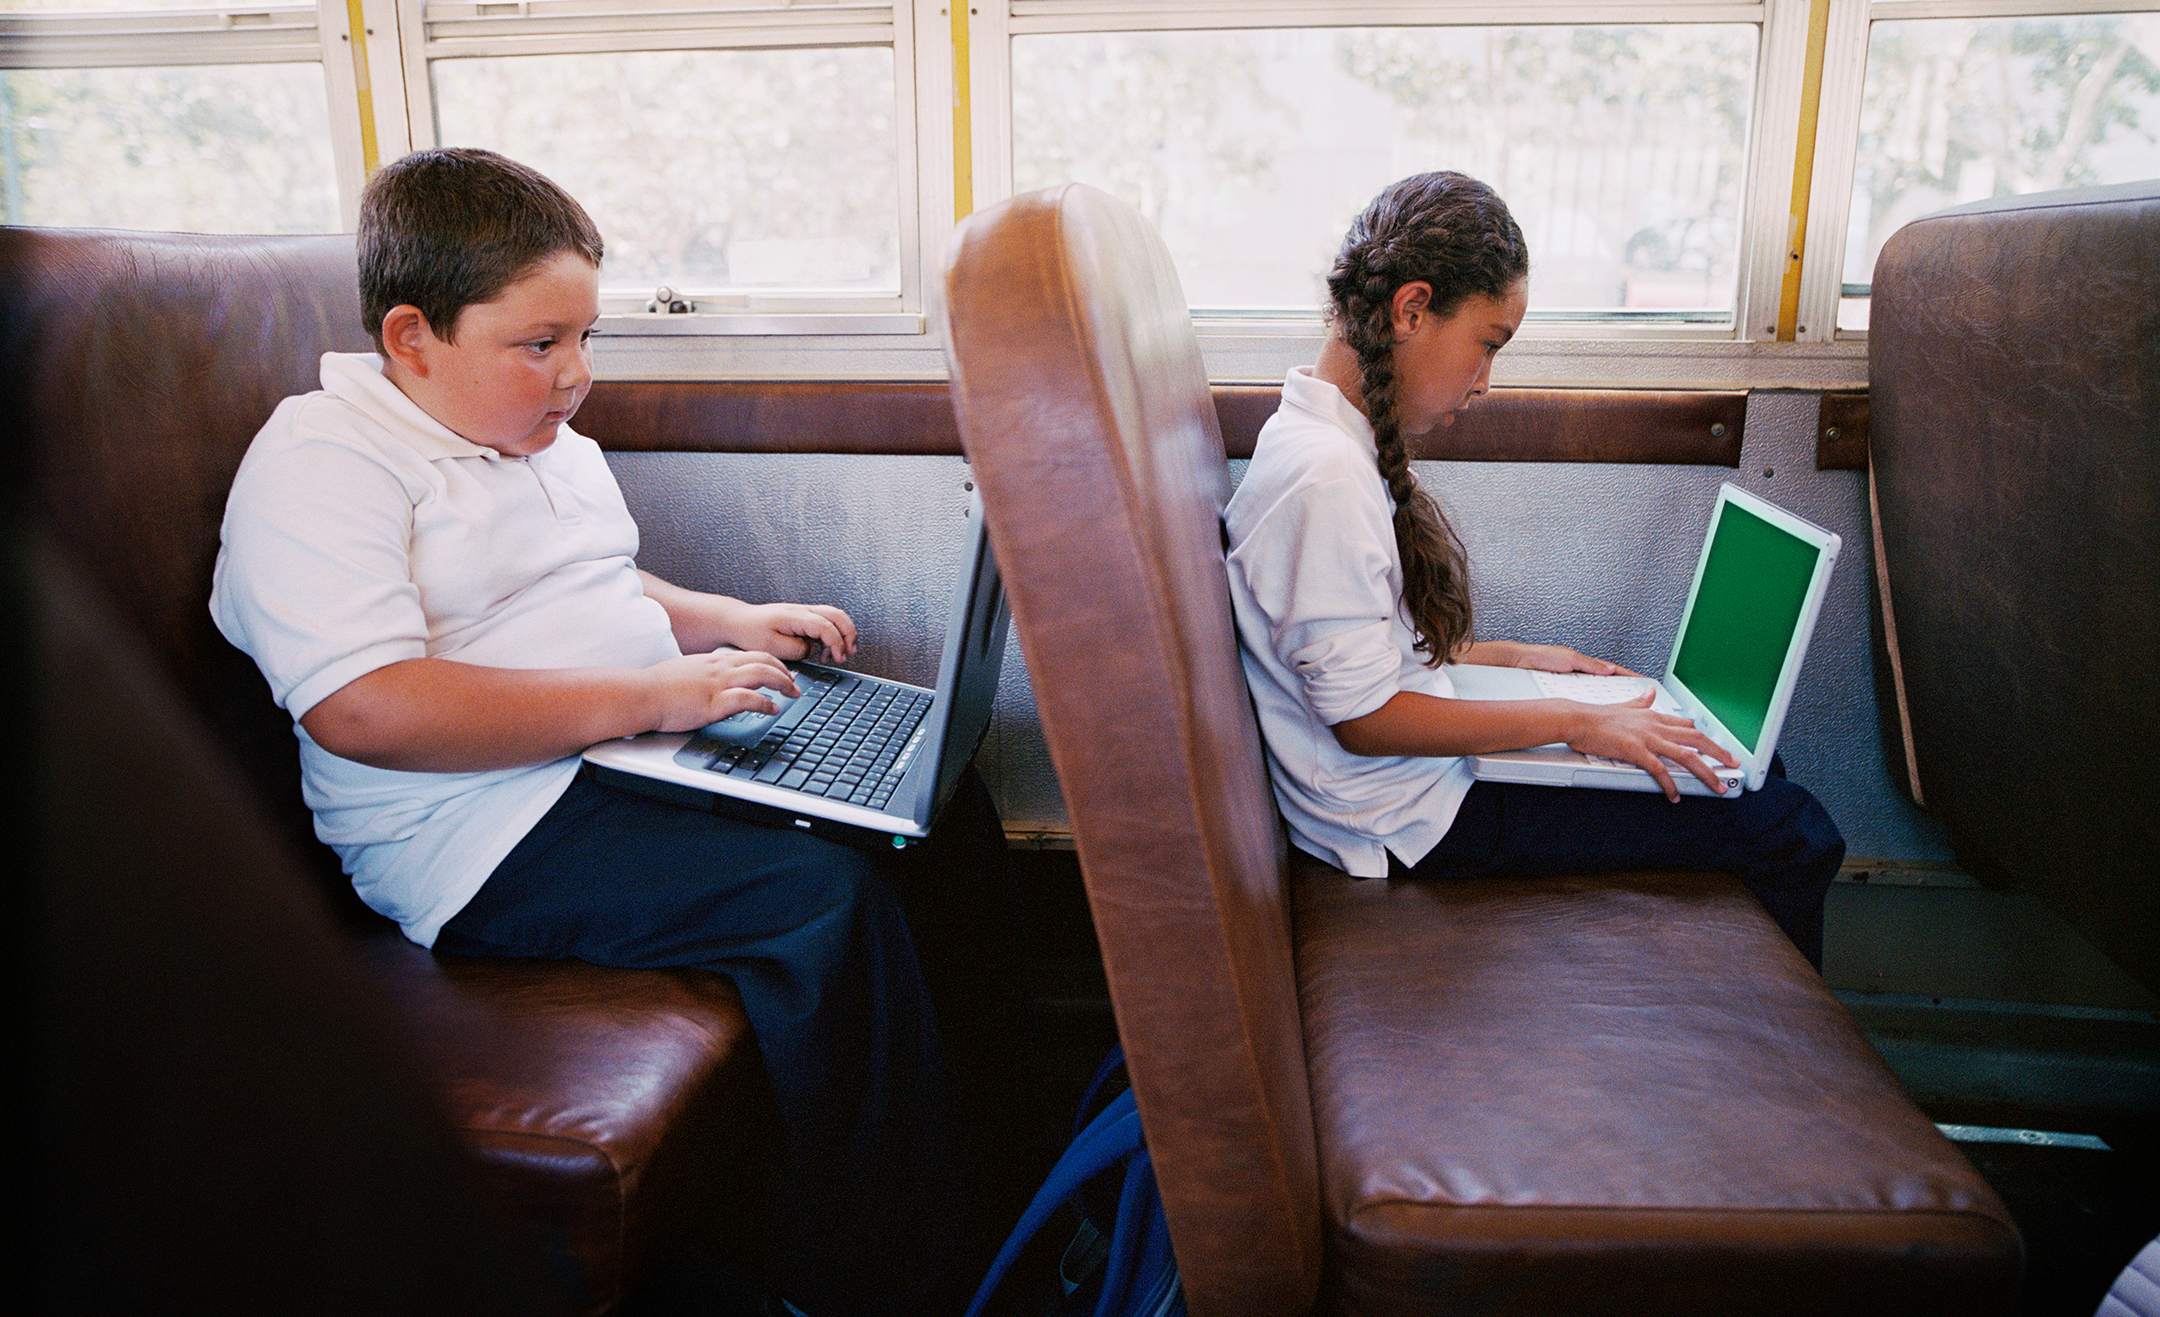 Boy and girl (5-7) on school bus with laptop computer, side view